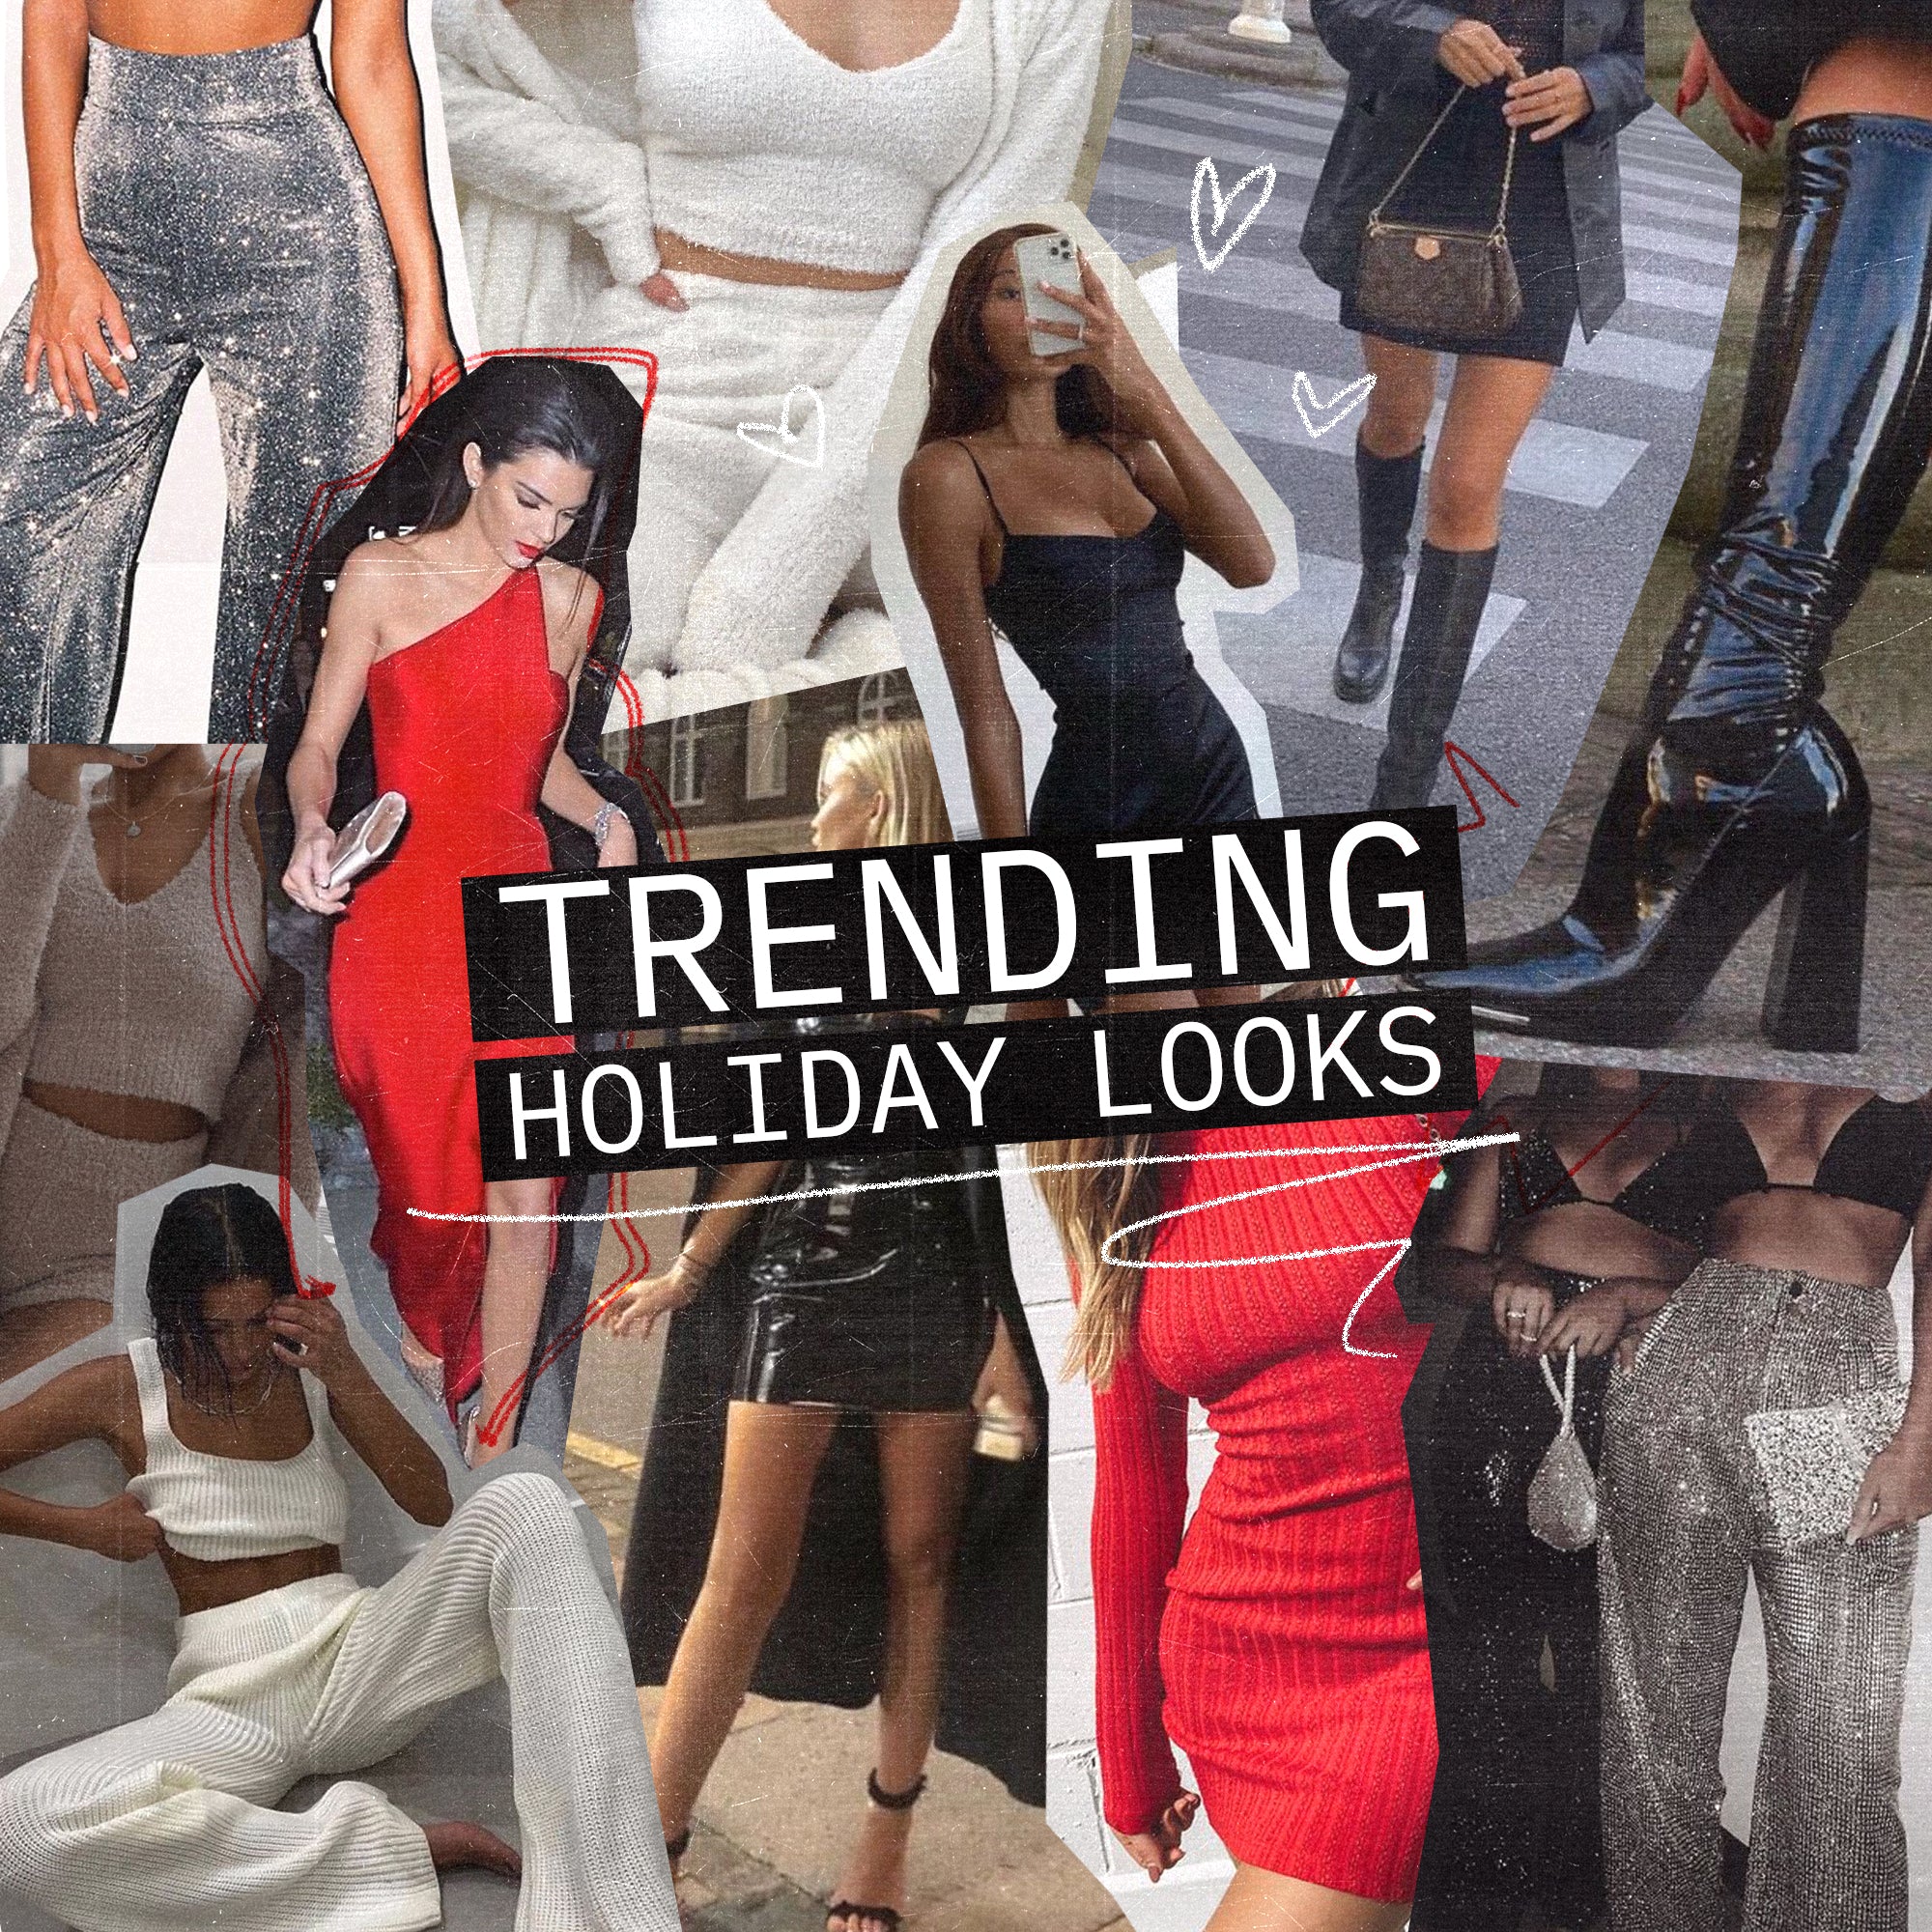 Trending Holiday Looks image